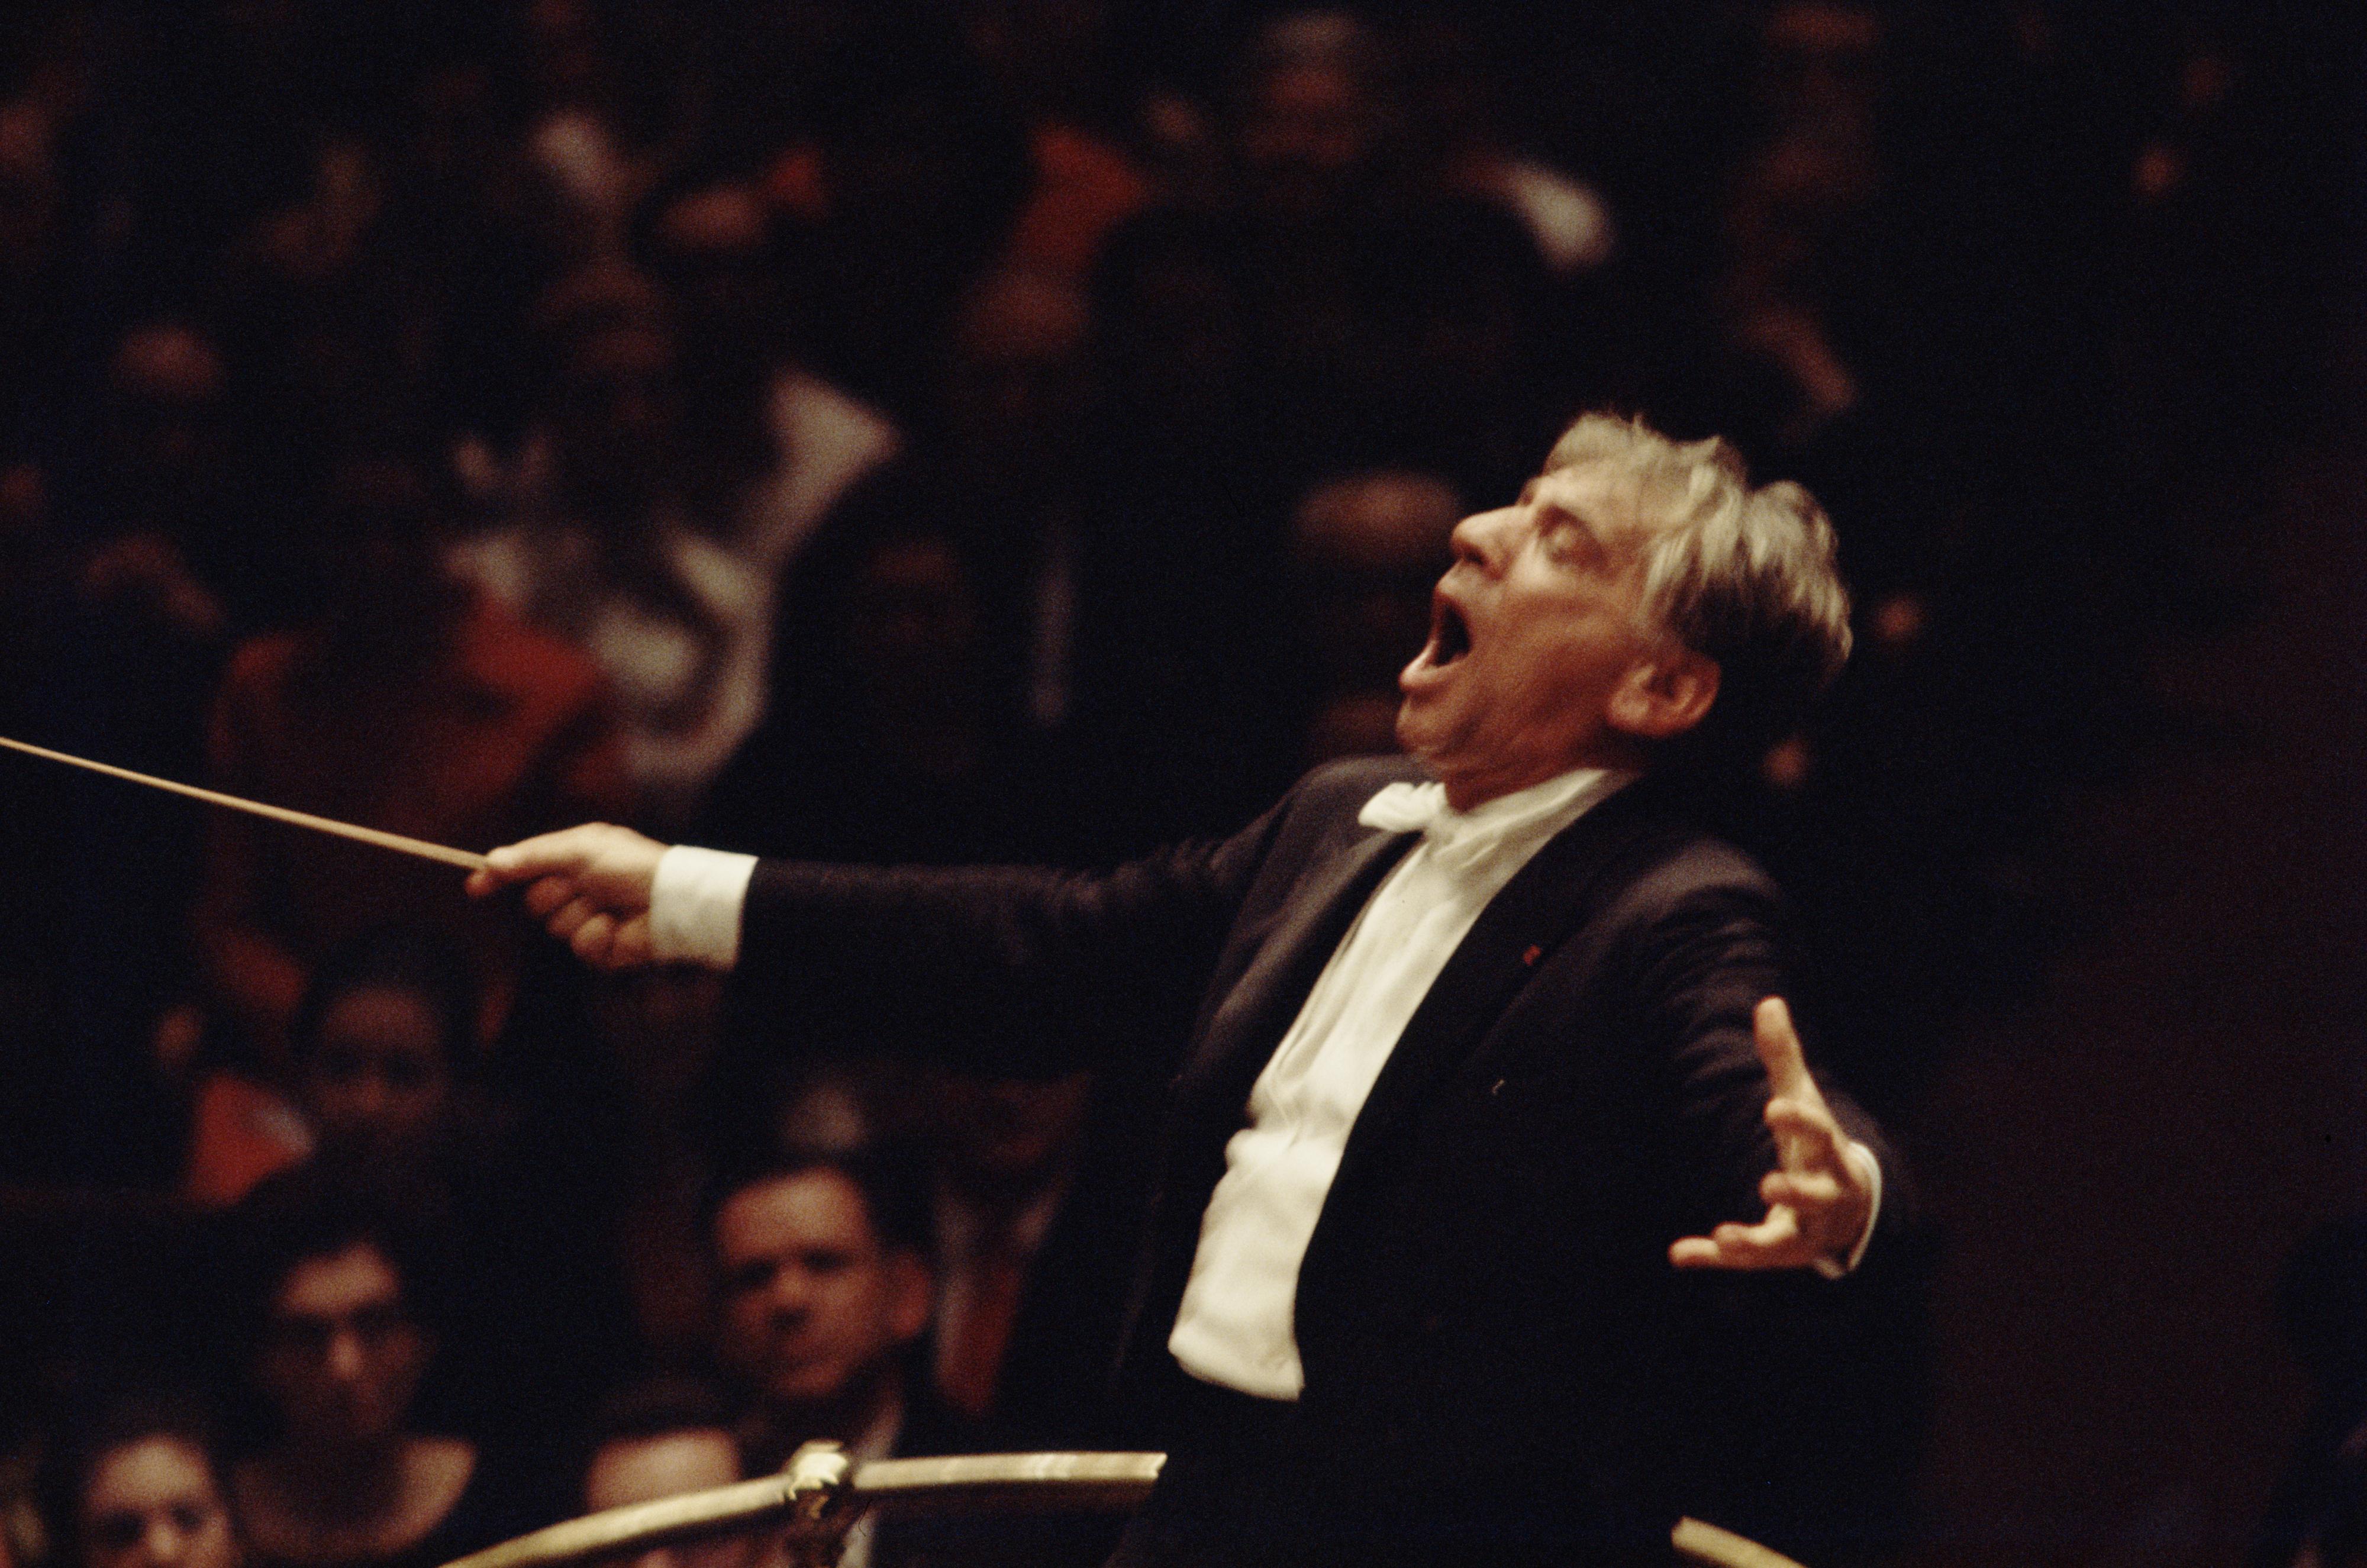 American composer, conductor and pianist Leonard Bernstein (1918 - 1990) conducting, circa 1975. (Photo by Erich Auerbach/Hulton Archive/Getty Images) [Hulton Archive/Getty Images) - Erich Auerbach]